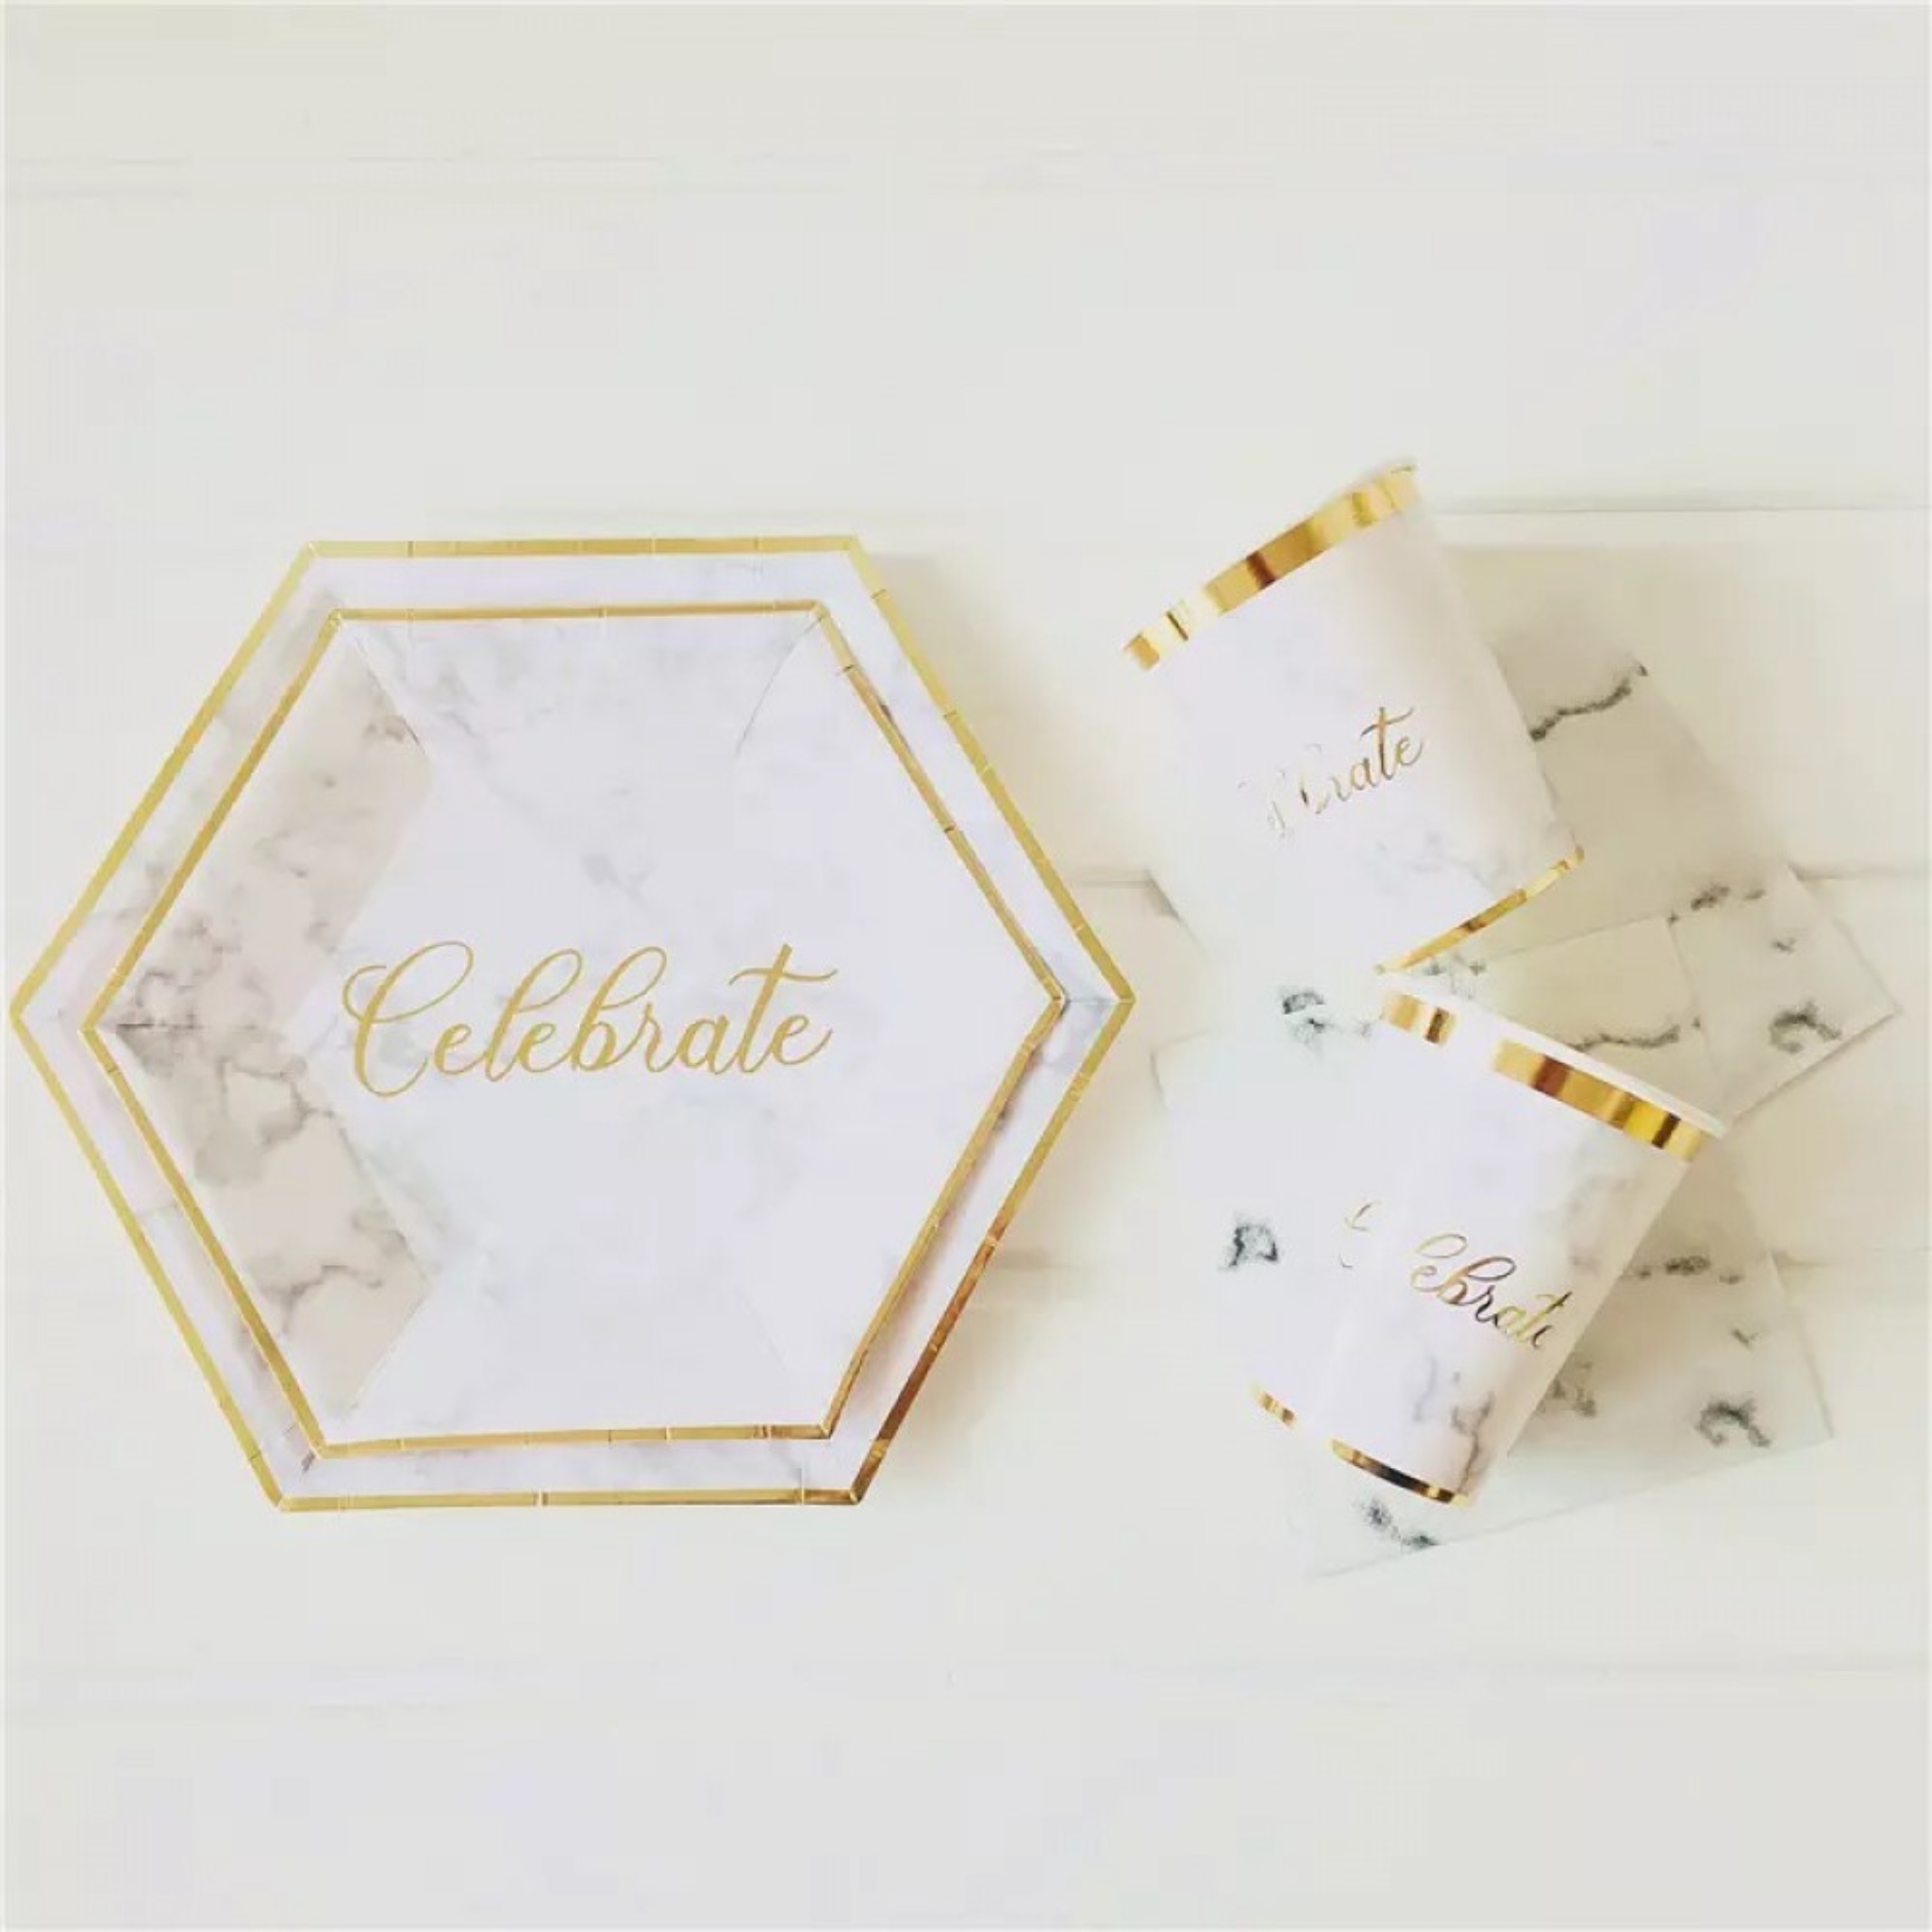 White Marble Pattern with Gold Stripe 8 Inch Paper Plates Set